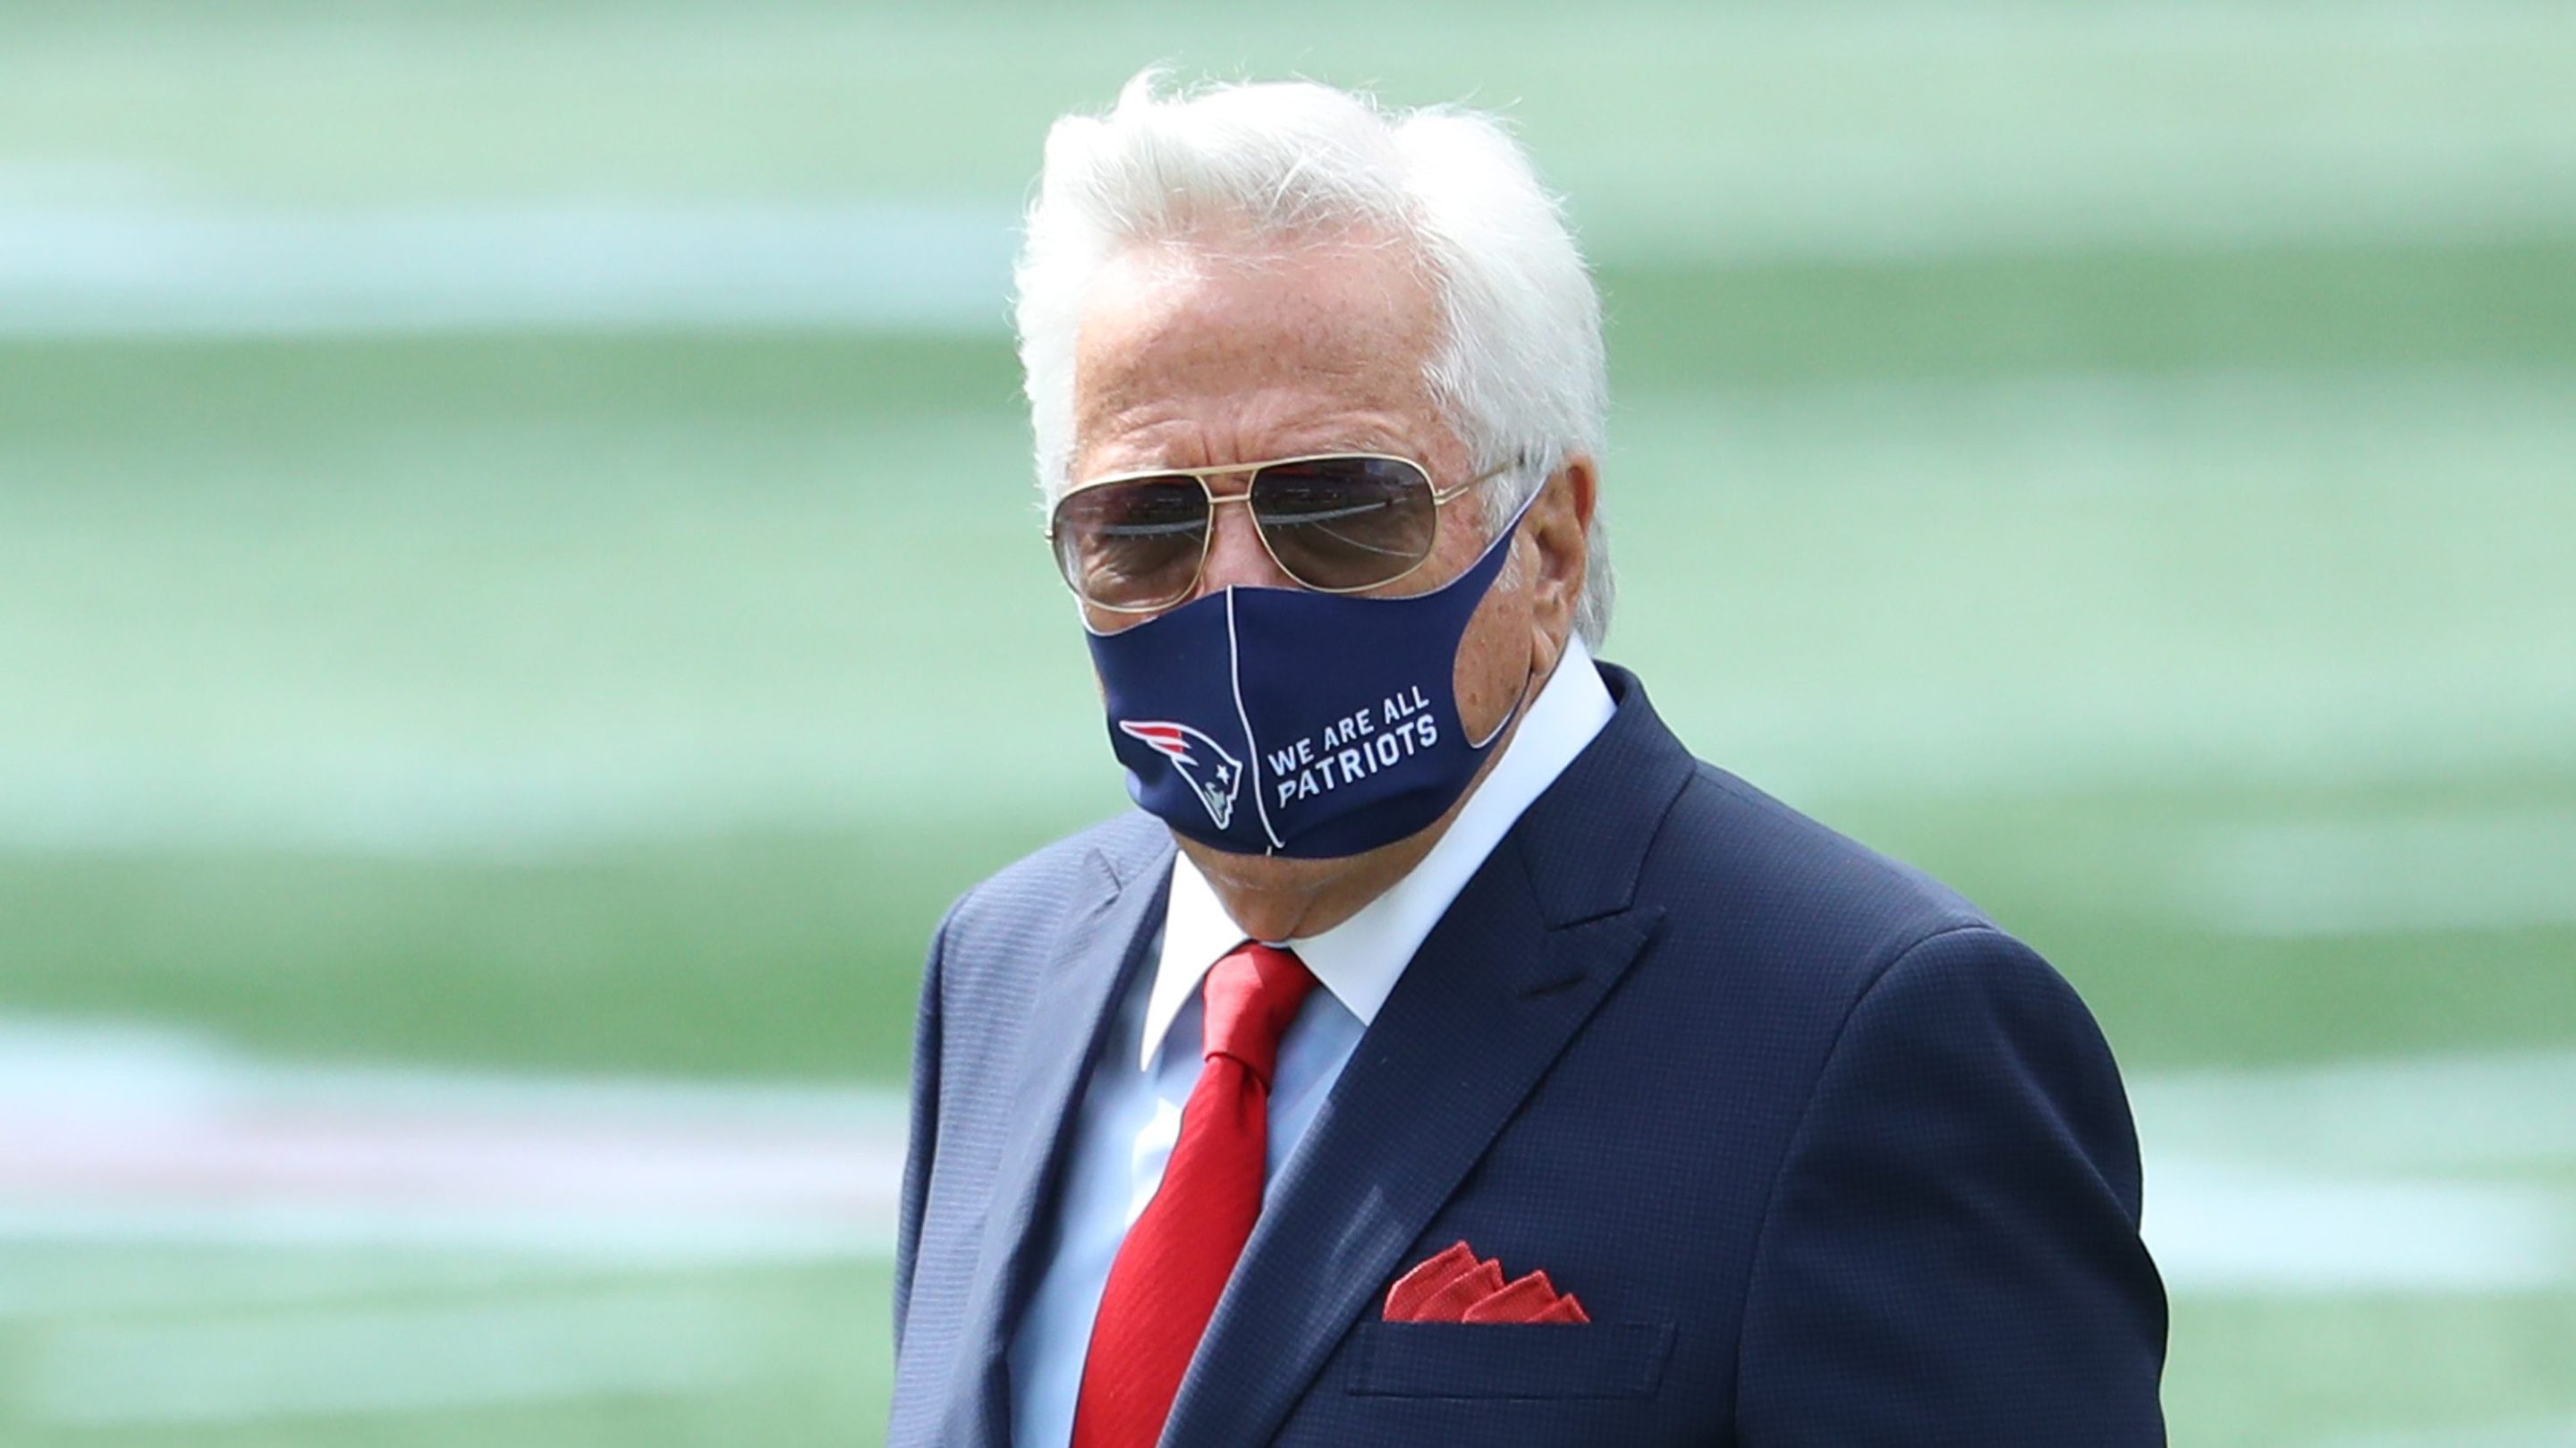 Patriots owner Robert Kraft wears a protective mask with "We Are All Patriots" stamped next to a Patriots logo.